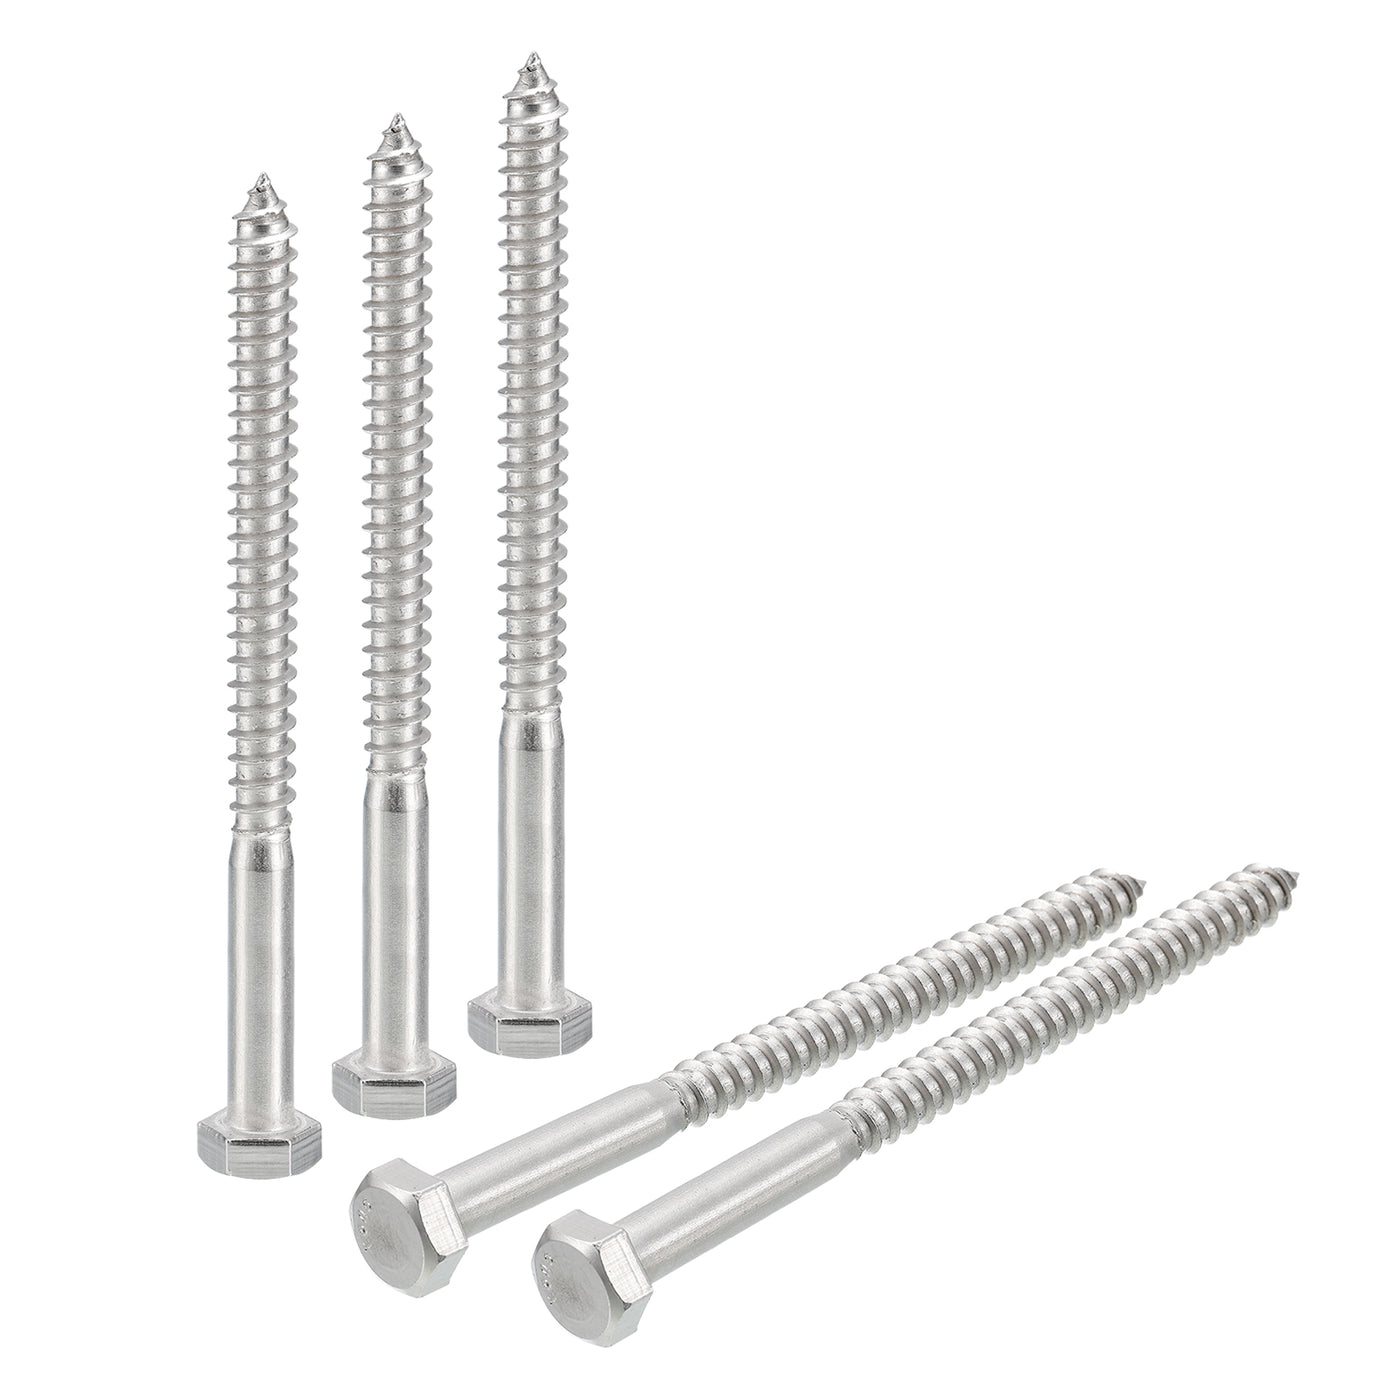 uxcell Uxcell Hex Head Lag Screws Bolts, 5pcs 5/16" x 4" 304 Stainless Steel Wood Screws